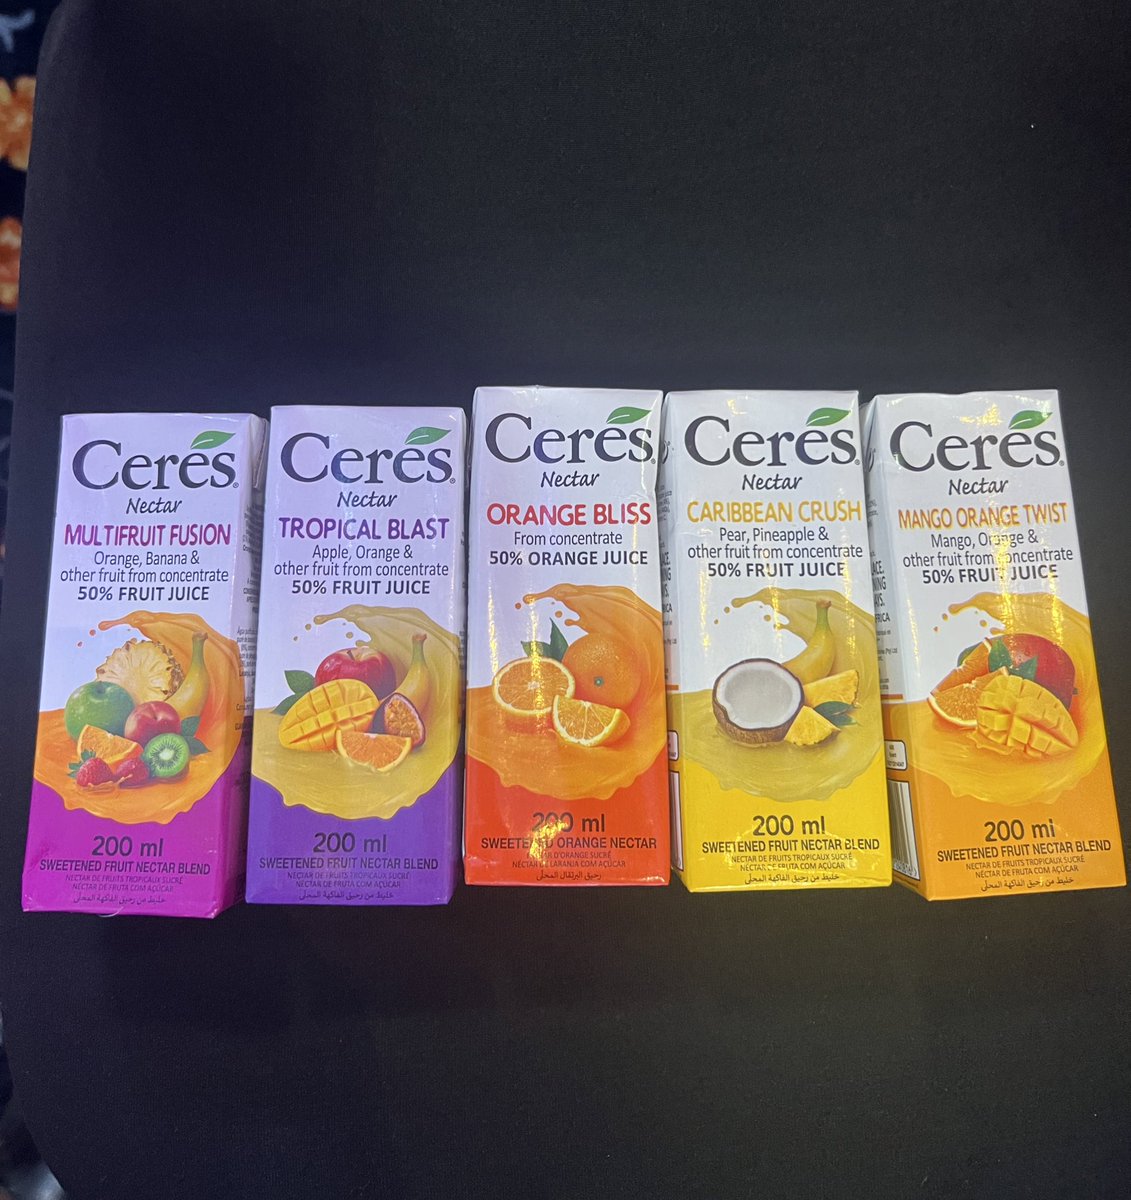 New Ceres products in Town  #TheCeresNectarEffect